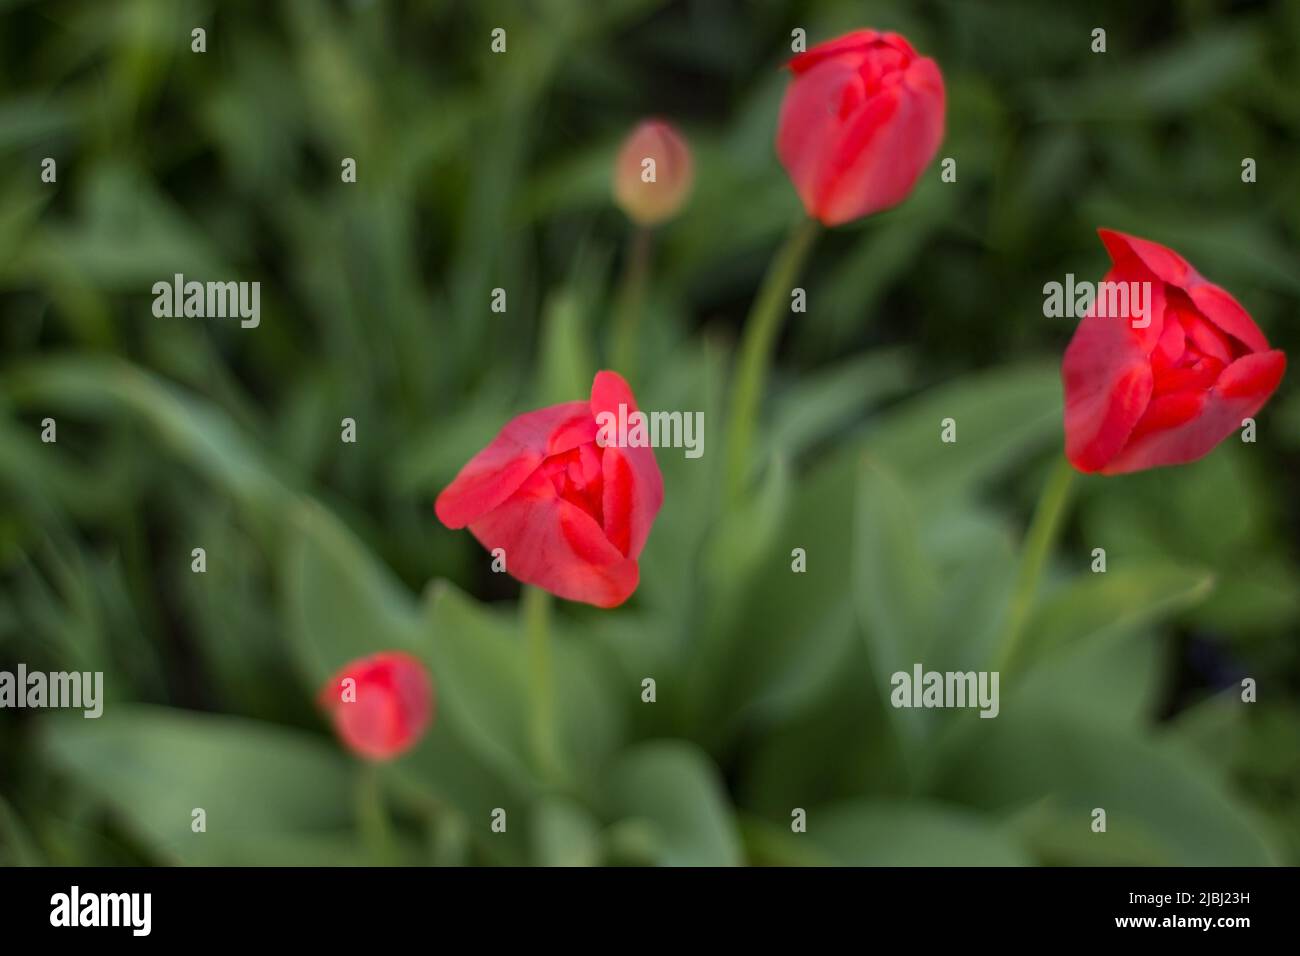 Red tulip with leaves in a garden flowerbed Stock Photo